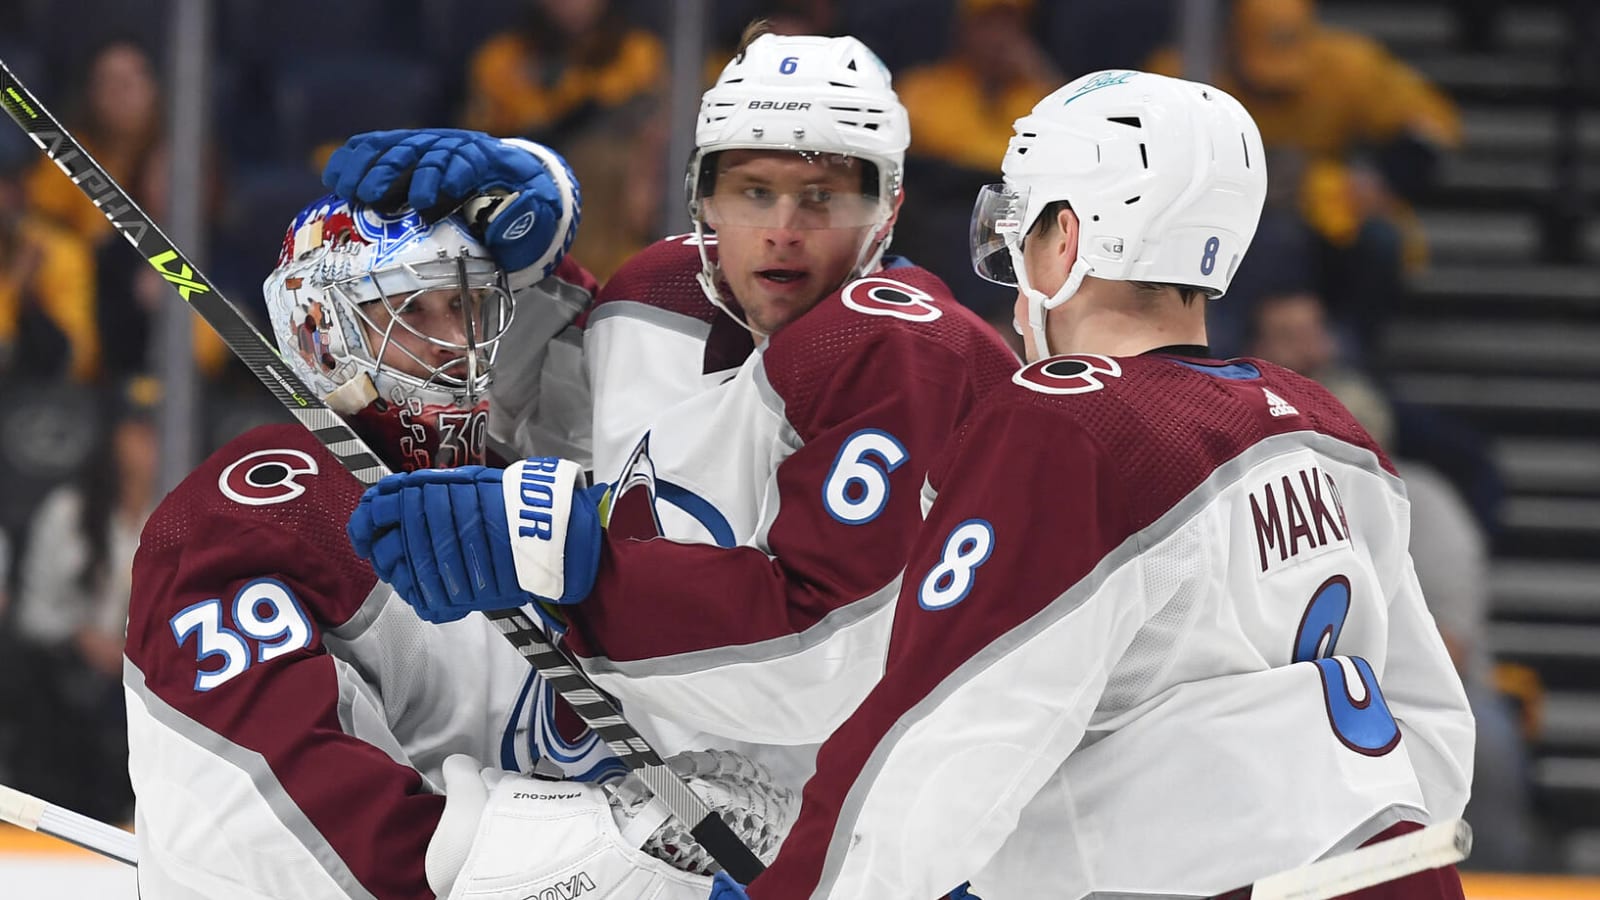 Avs' power play dominates Preds; Pens blow 4-1 lead but hang on for win